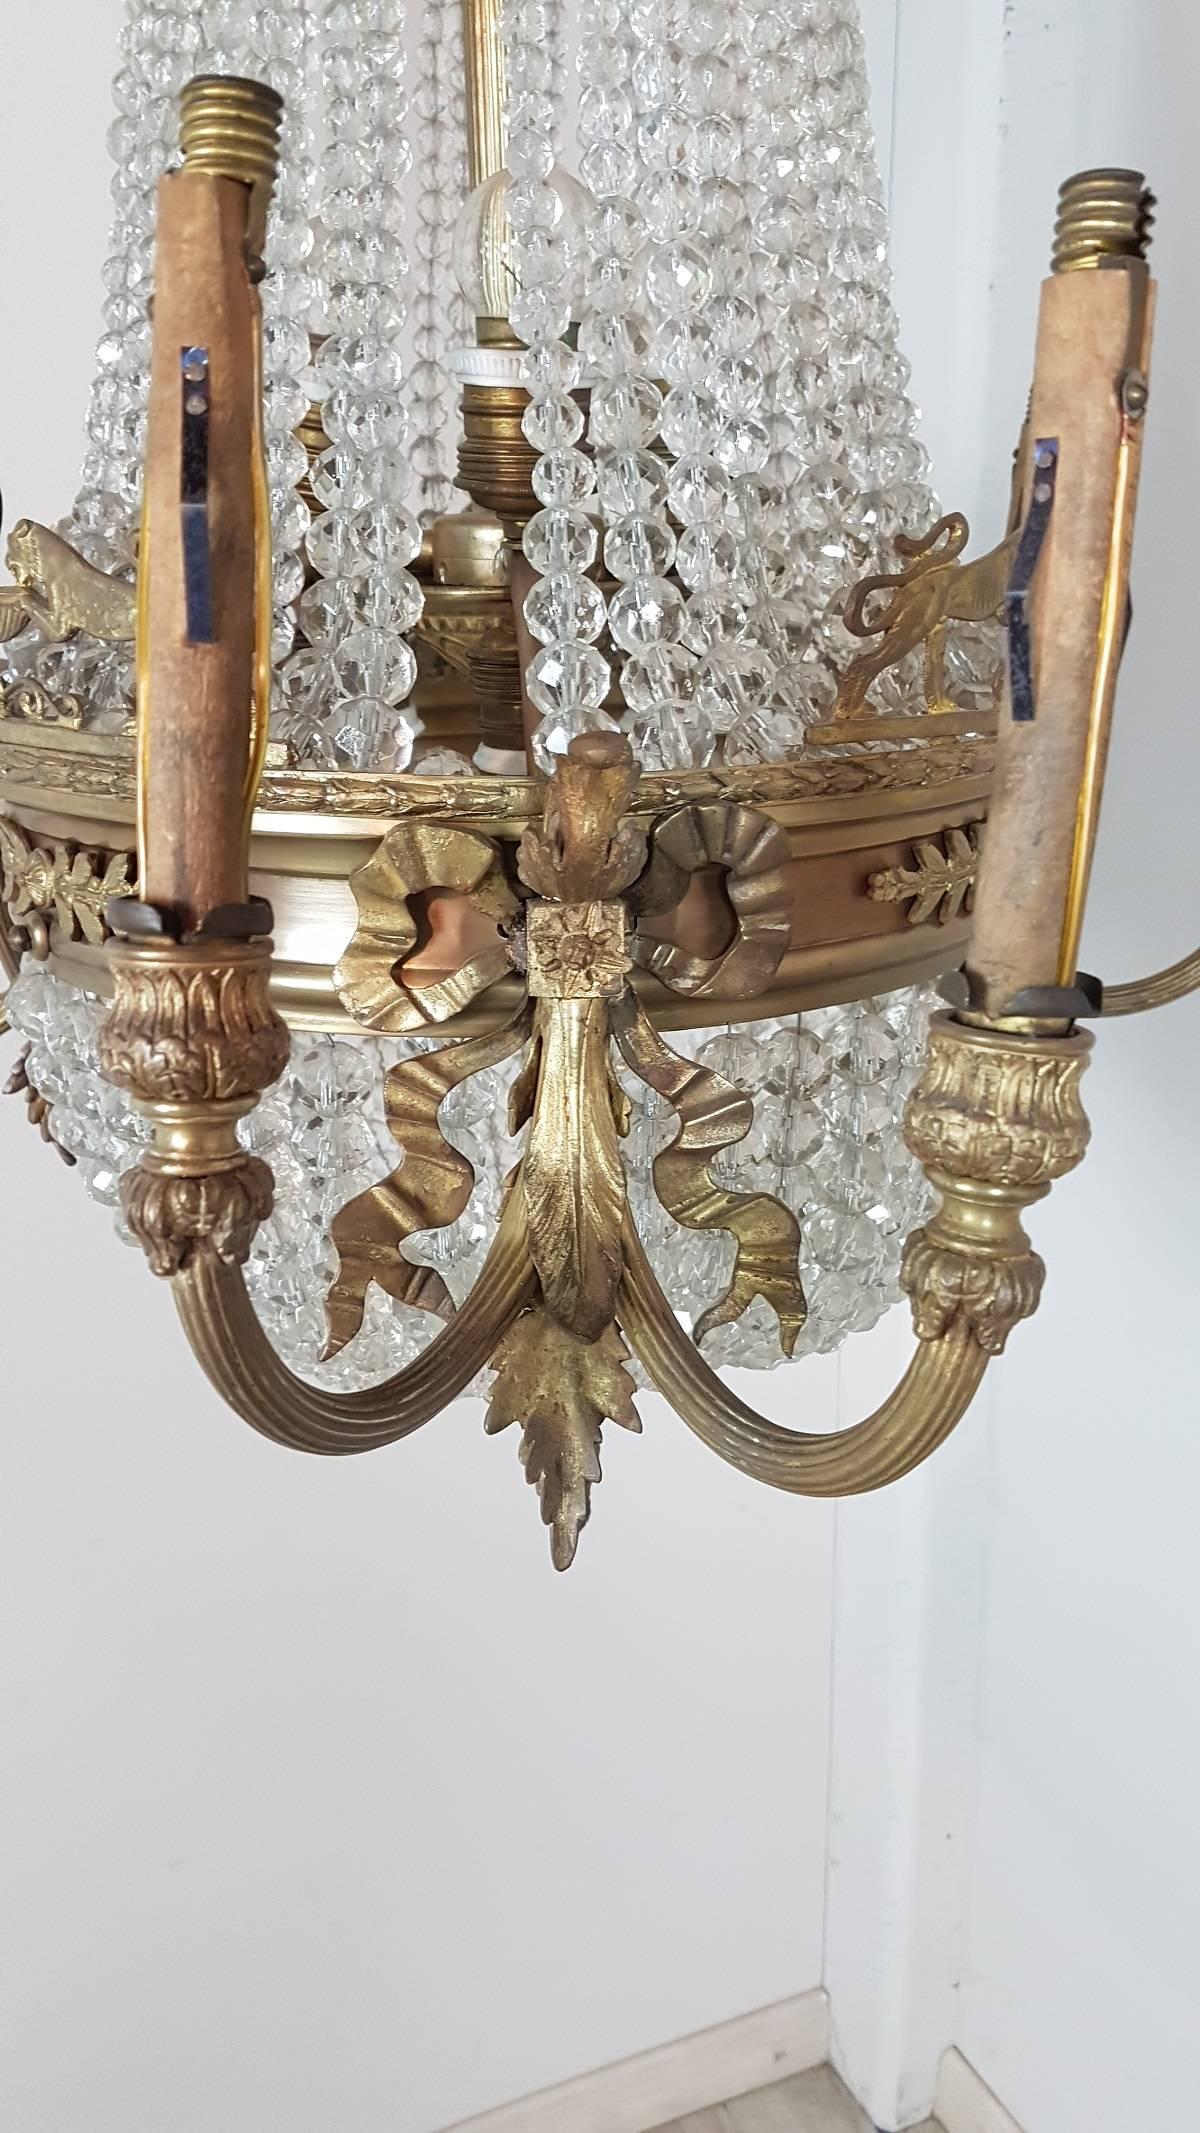 Early 19th Century 19th Century French Empire Gilded Bronze and Crystals Chandelier